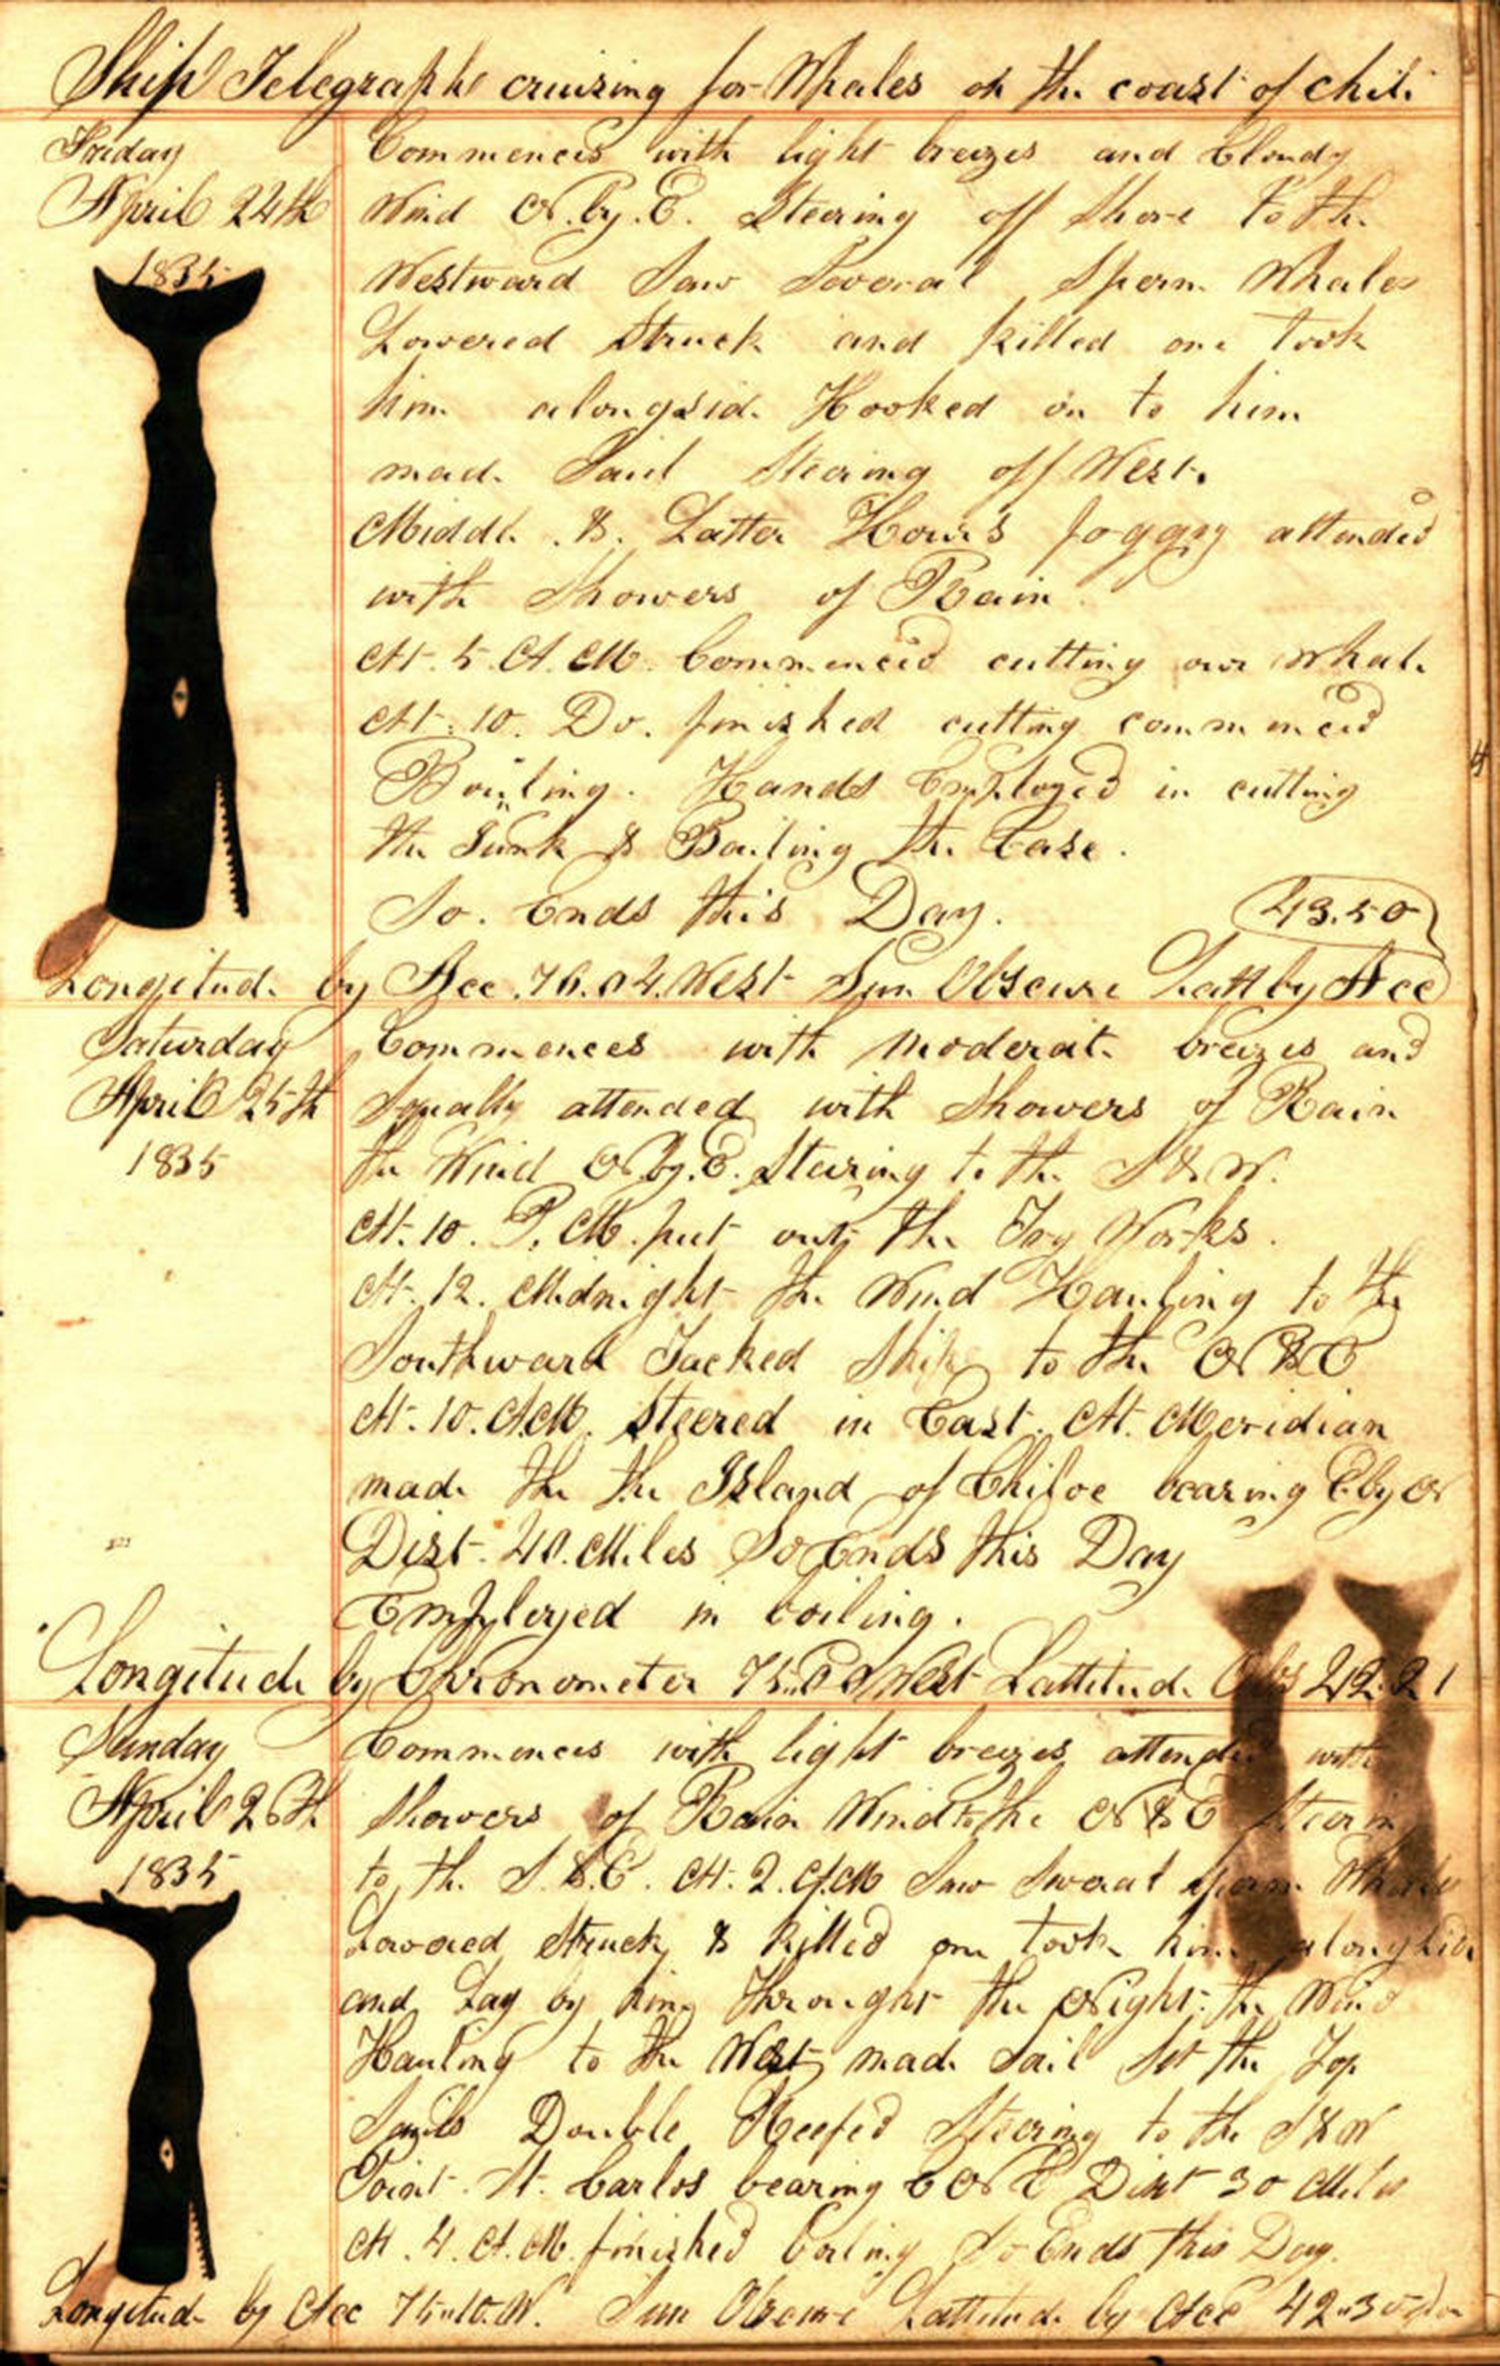 A page taken from the whaling ship Telegraph, on a voyage from Sag Harbor to the South Atlantic Ocean and Oceania, 21 October 1834 - 21 May 1836.    COURTESY EAST HAMPTON LIBRARY, LONG ISLAND COLLECTION